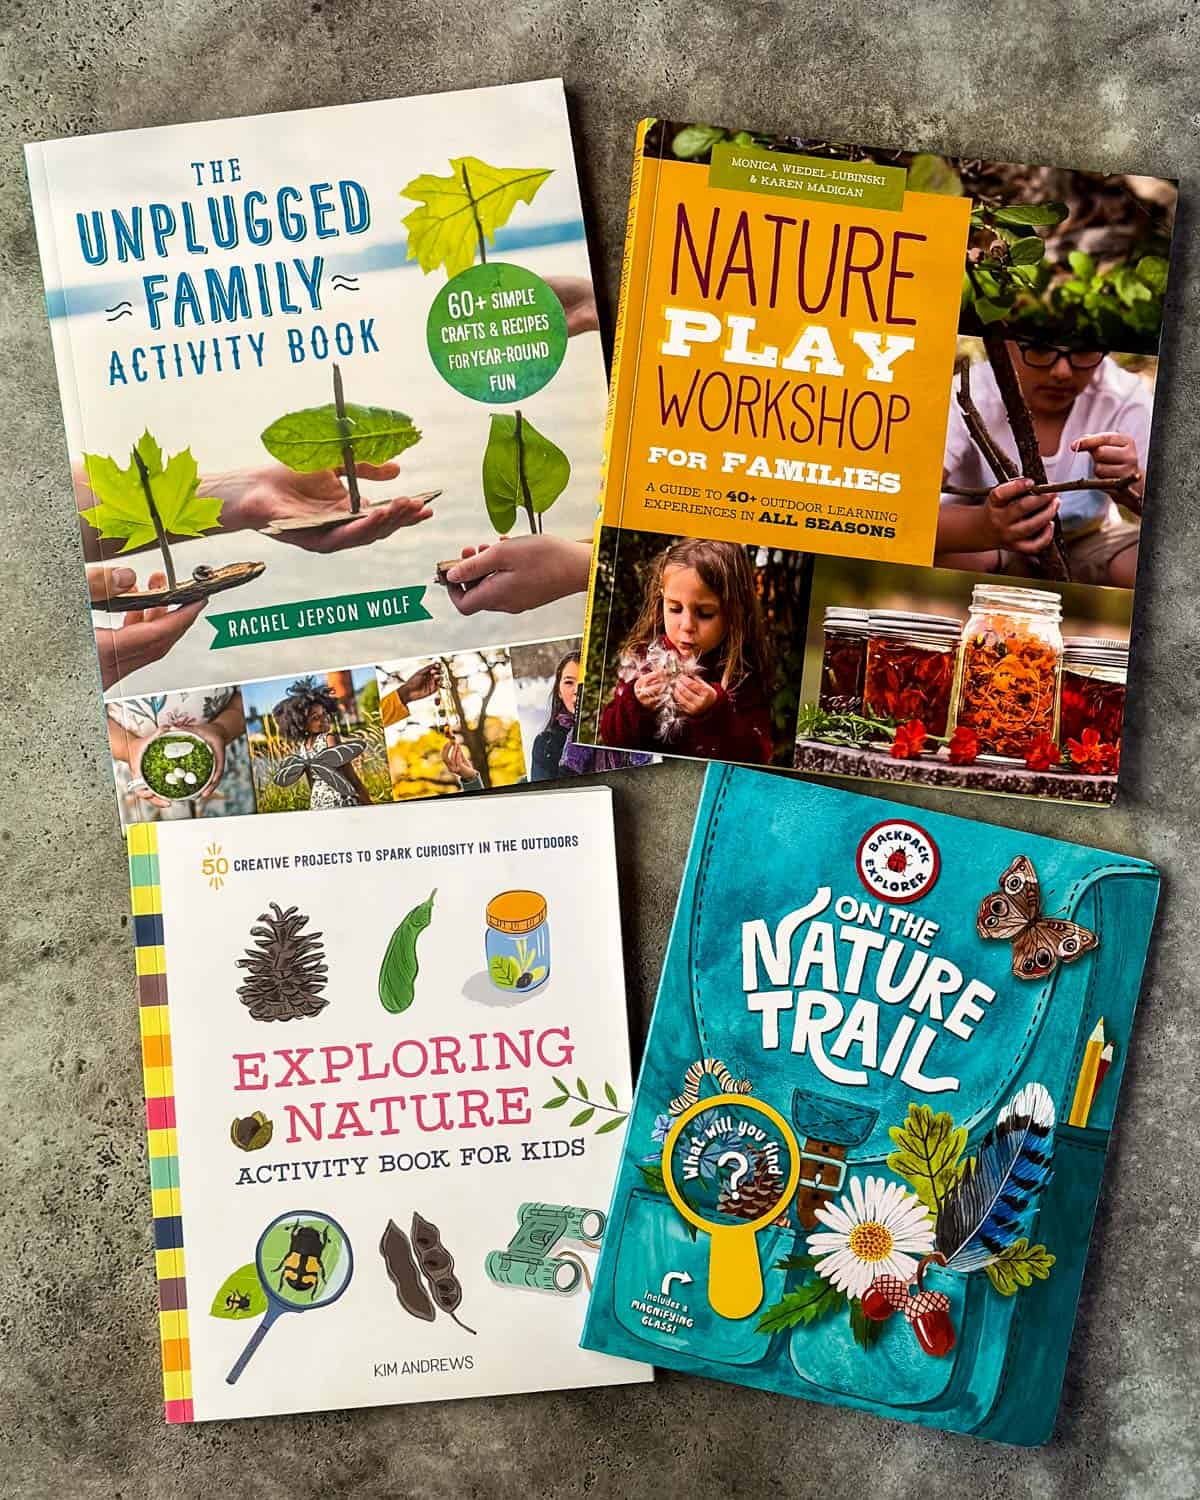 4 nature books for kids face up on a gray surface. 